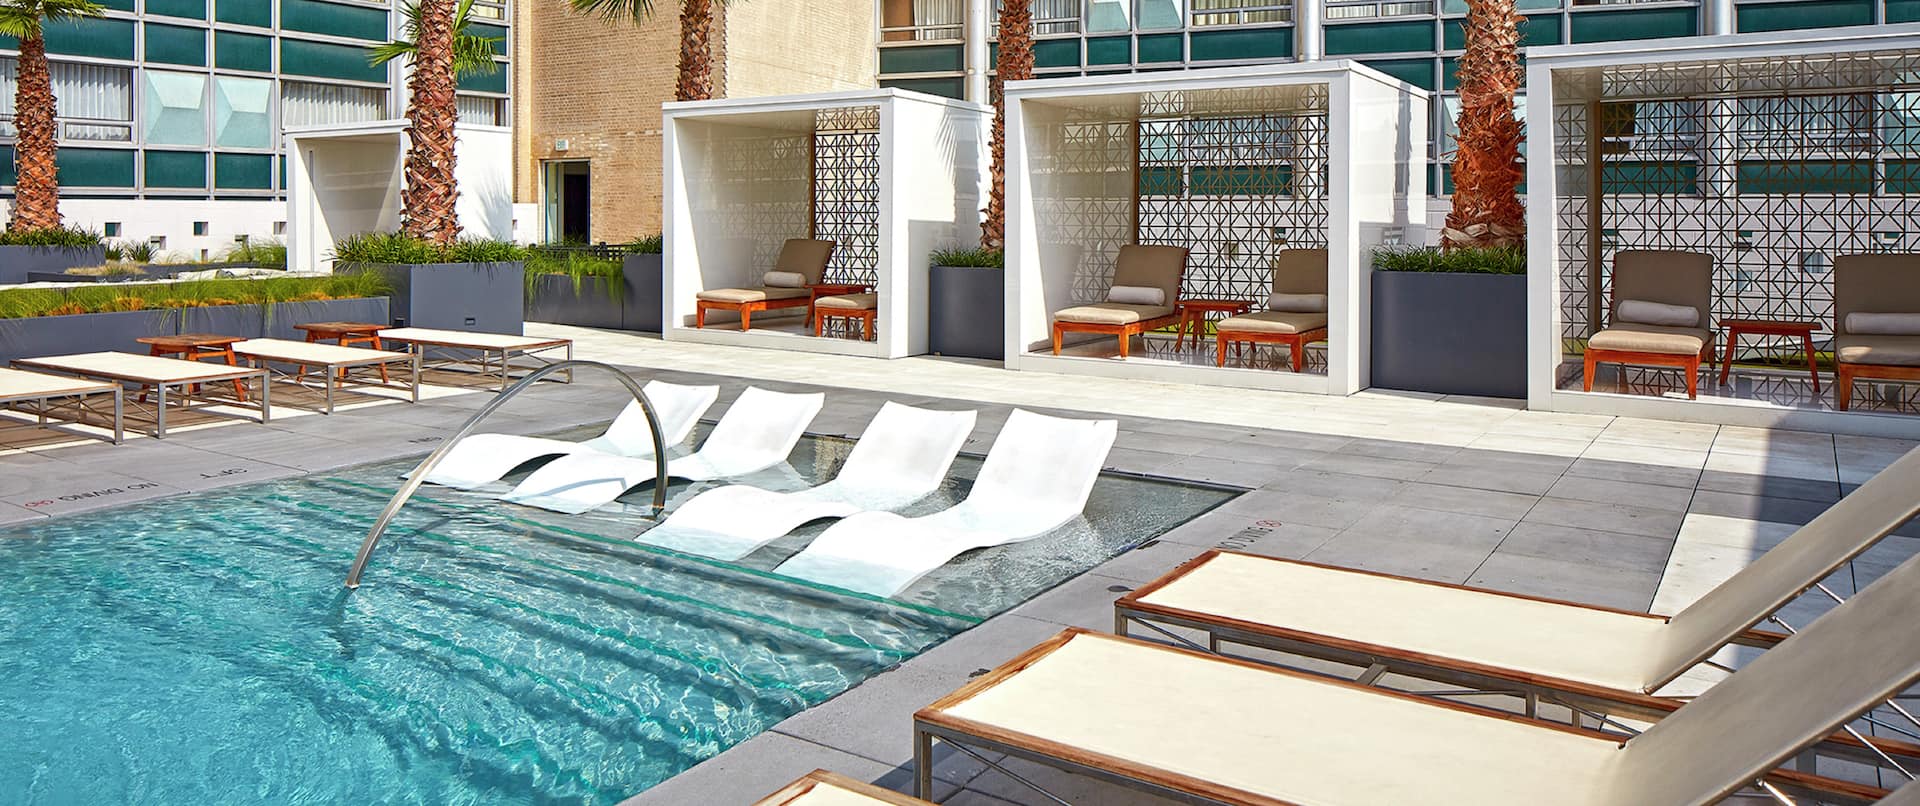 Rooftop Pool with Cabanas and Lounge Chairs